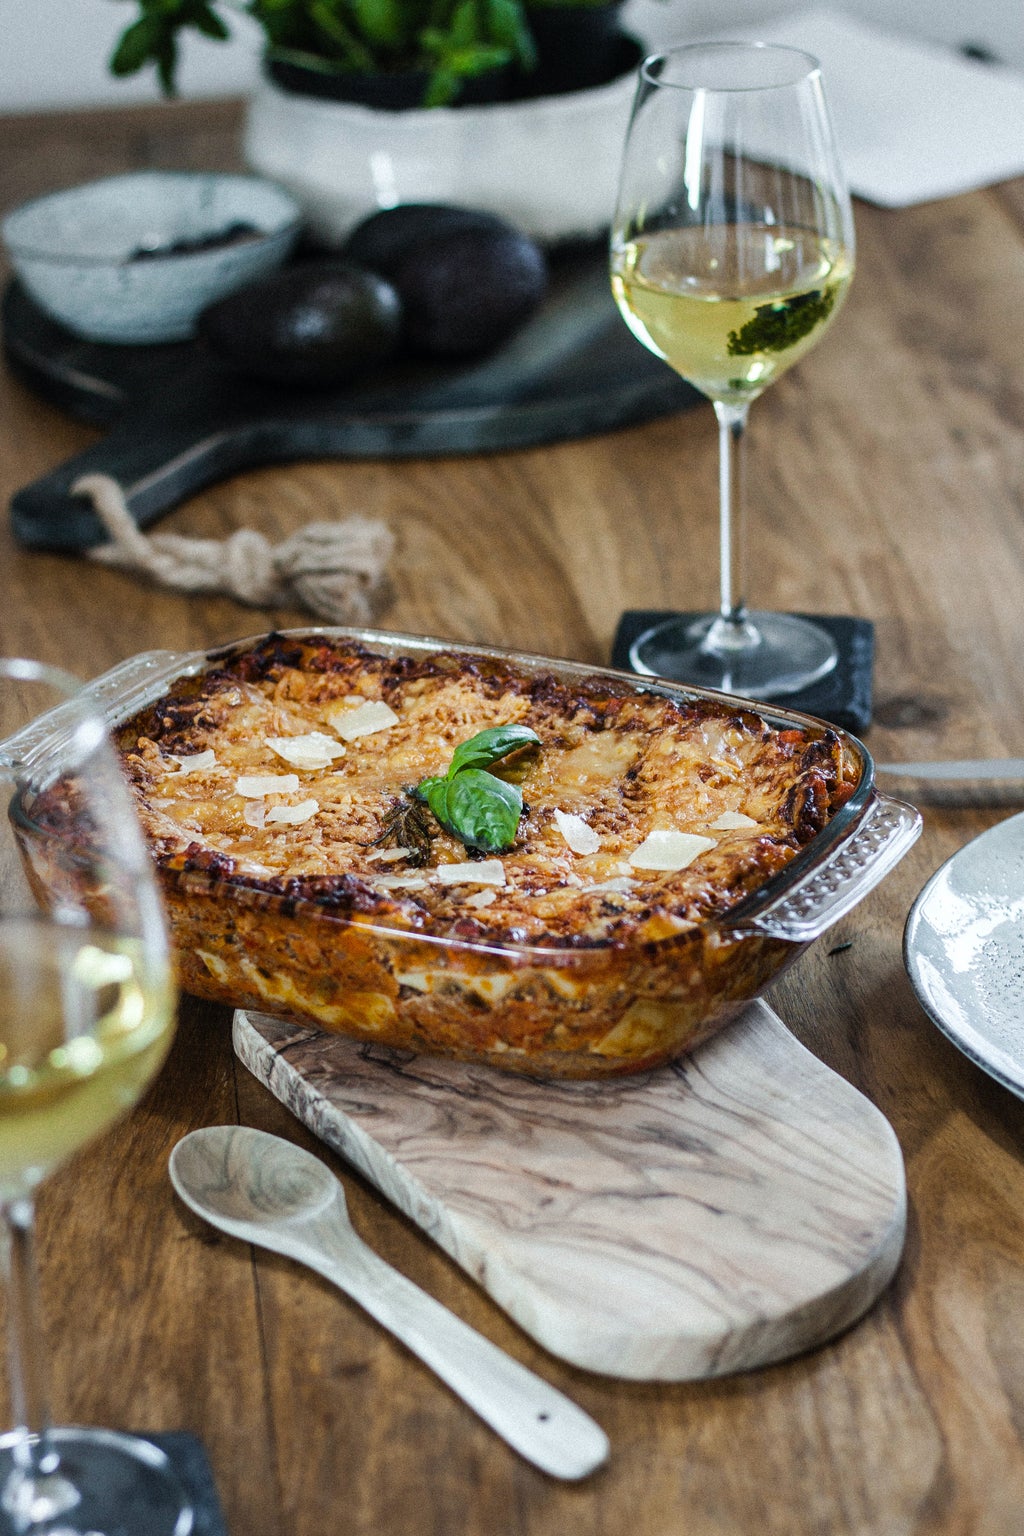 lasagna on a wooden table surrounded by wooden serving spoon and glasses of white wine